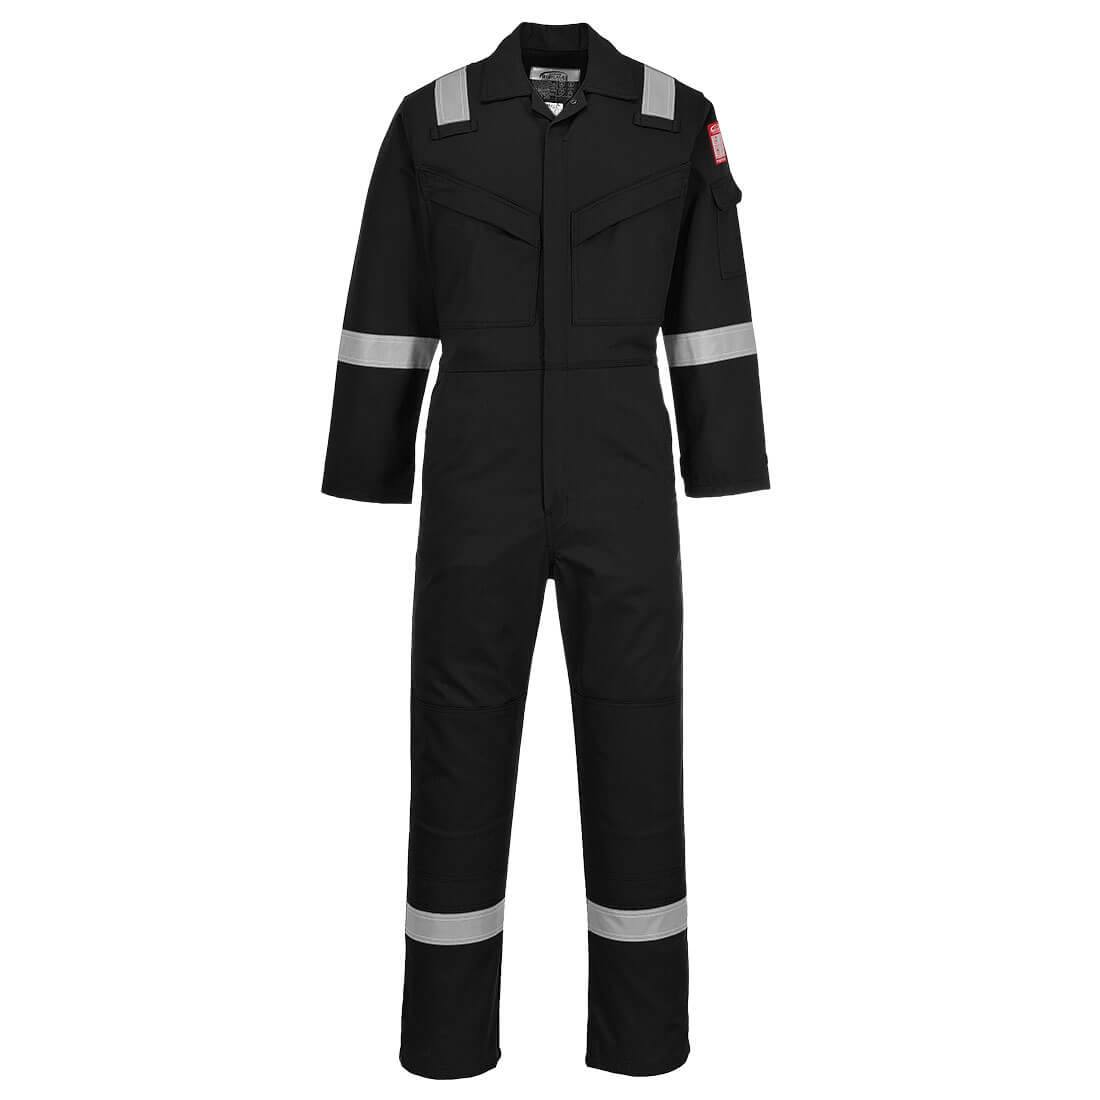 Image of Biz Flame Mens Aberdeen Flame Resistant Antistatic Coverall Black 2XL 32"